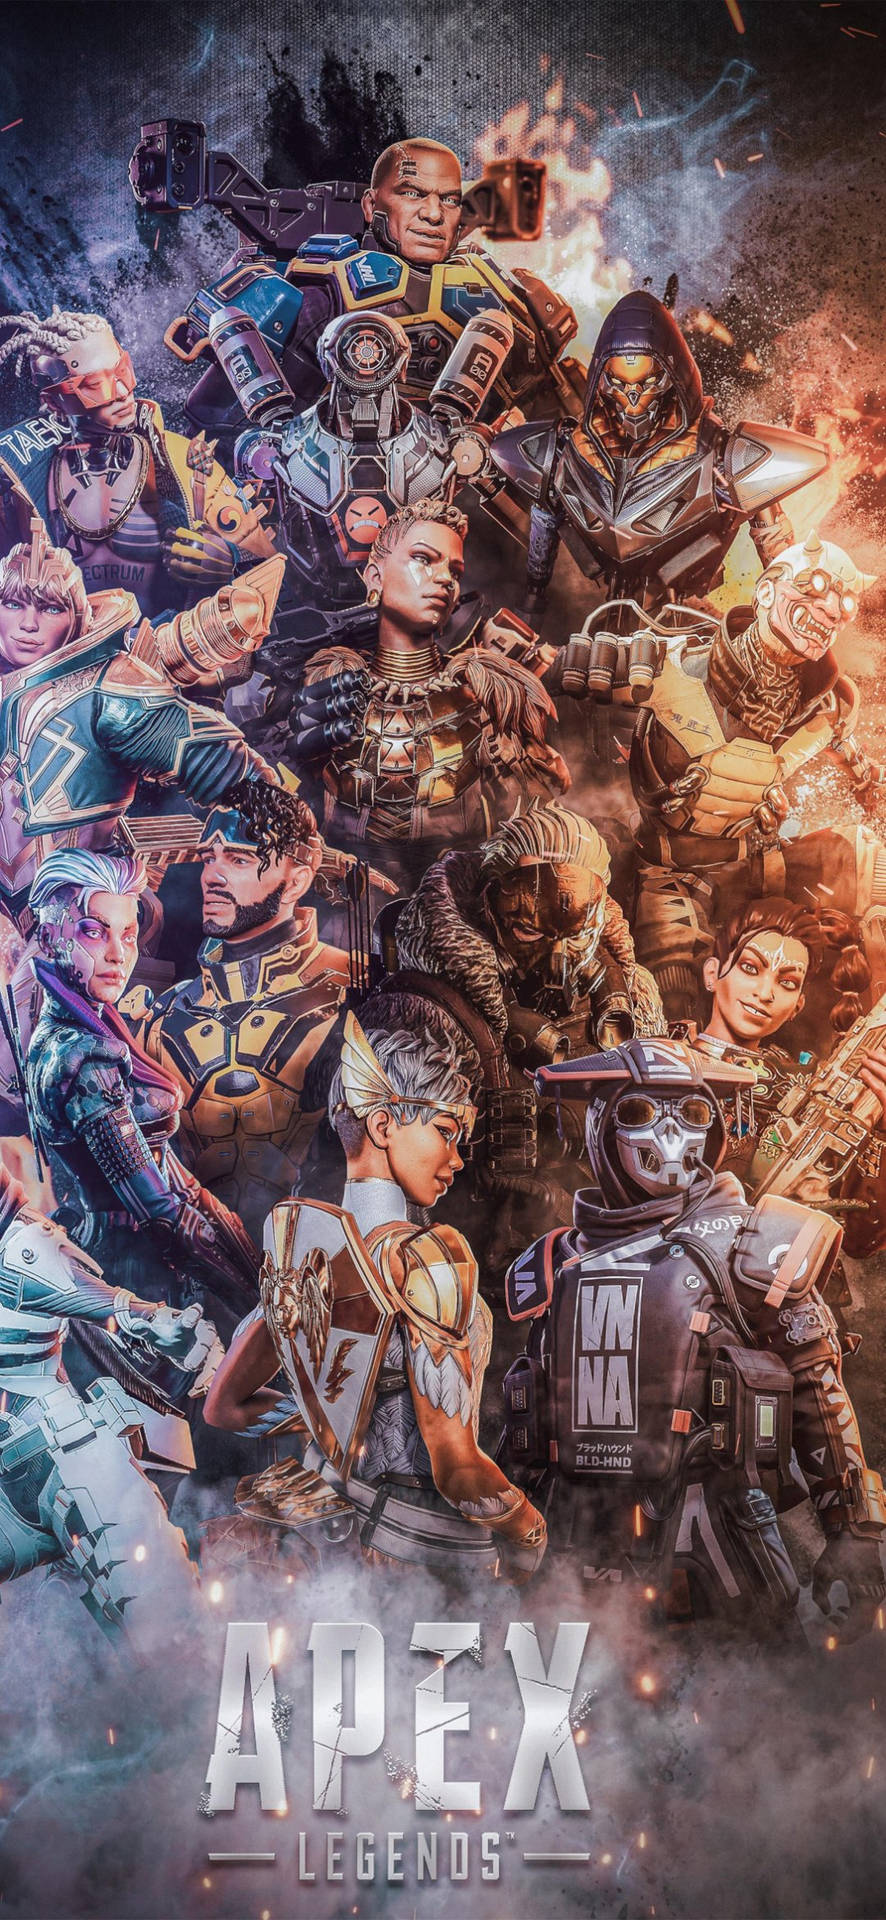 Apex Legends Wallpaper For Ps4  Iphone wallpaper Best gaming wallpapers  Hd images